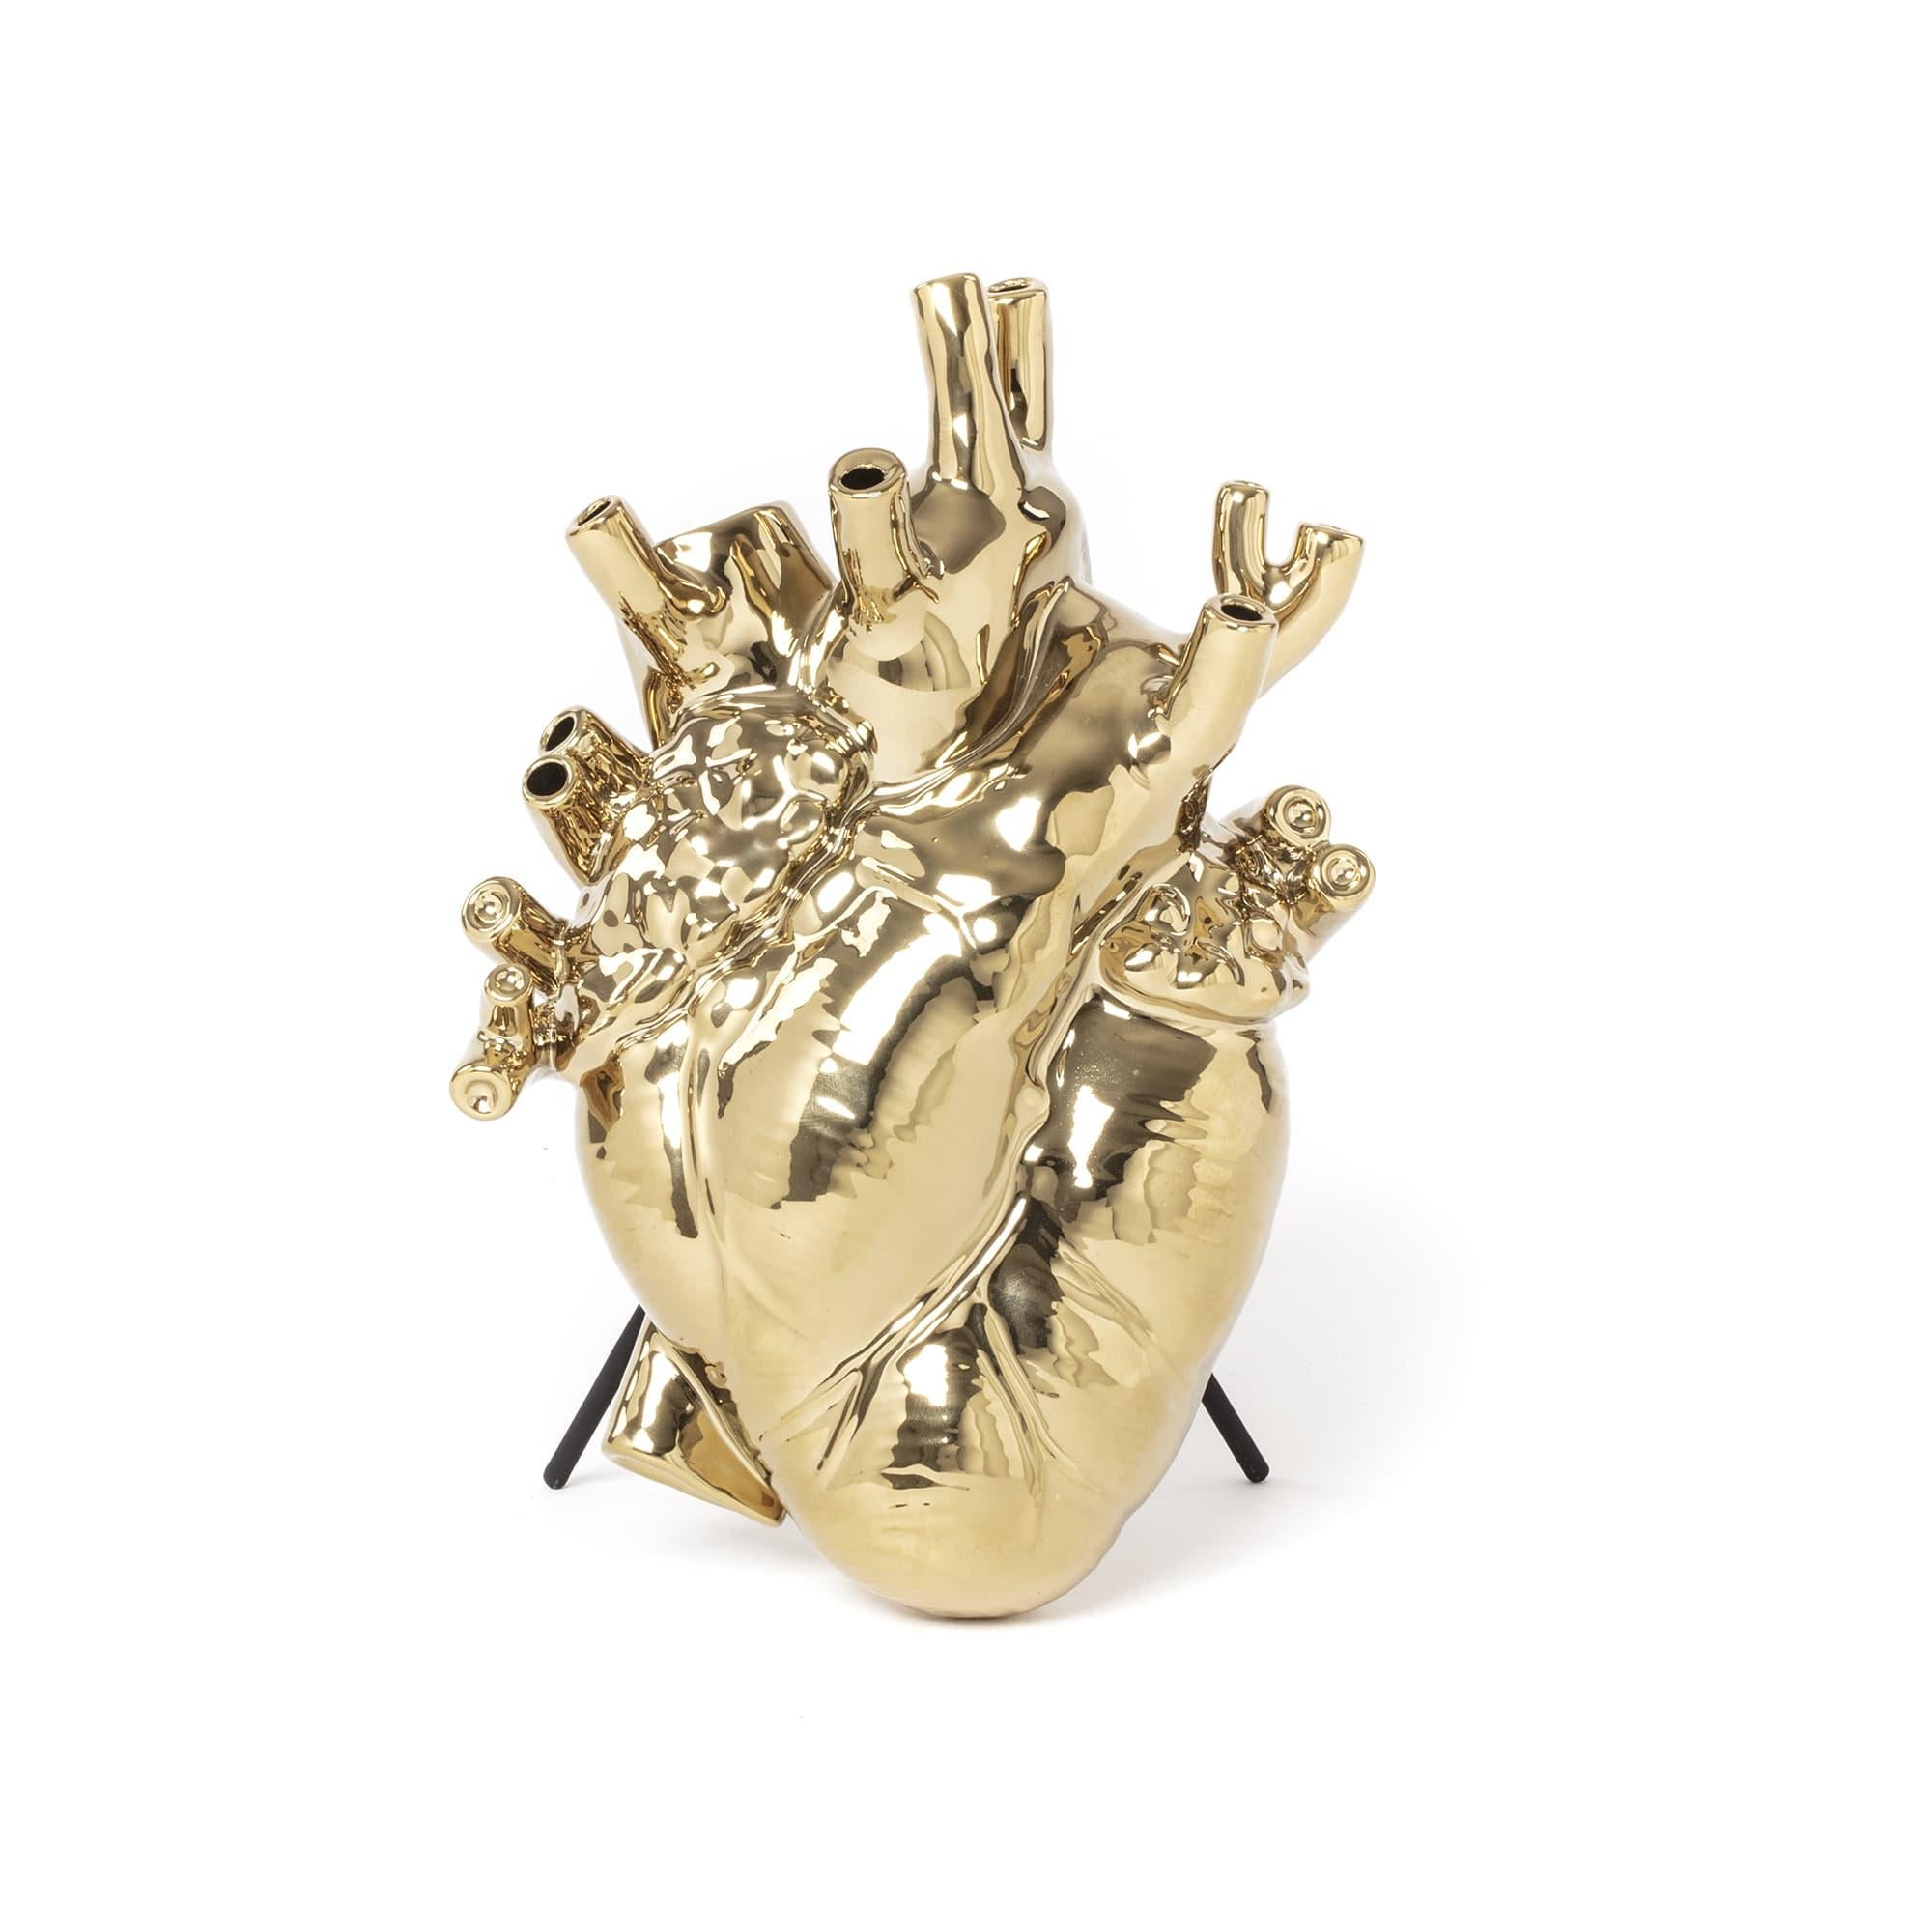 Contemporary Seletti 'Love in Bloom' Gold Edition Heart Vase by Marcantonio For Sale